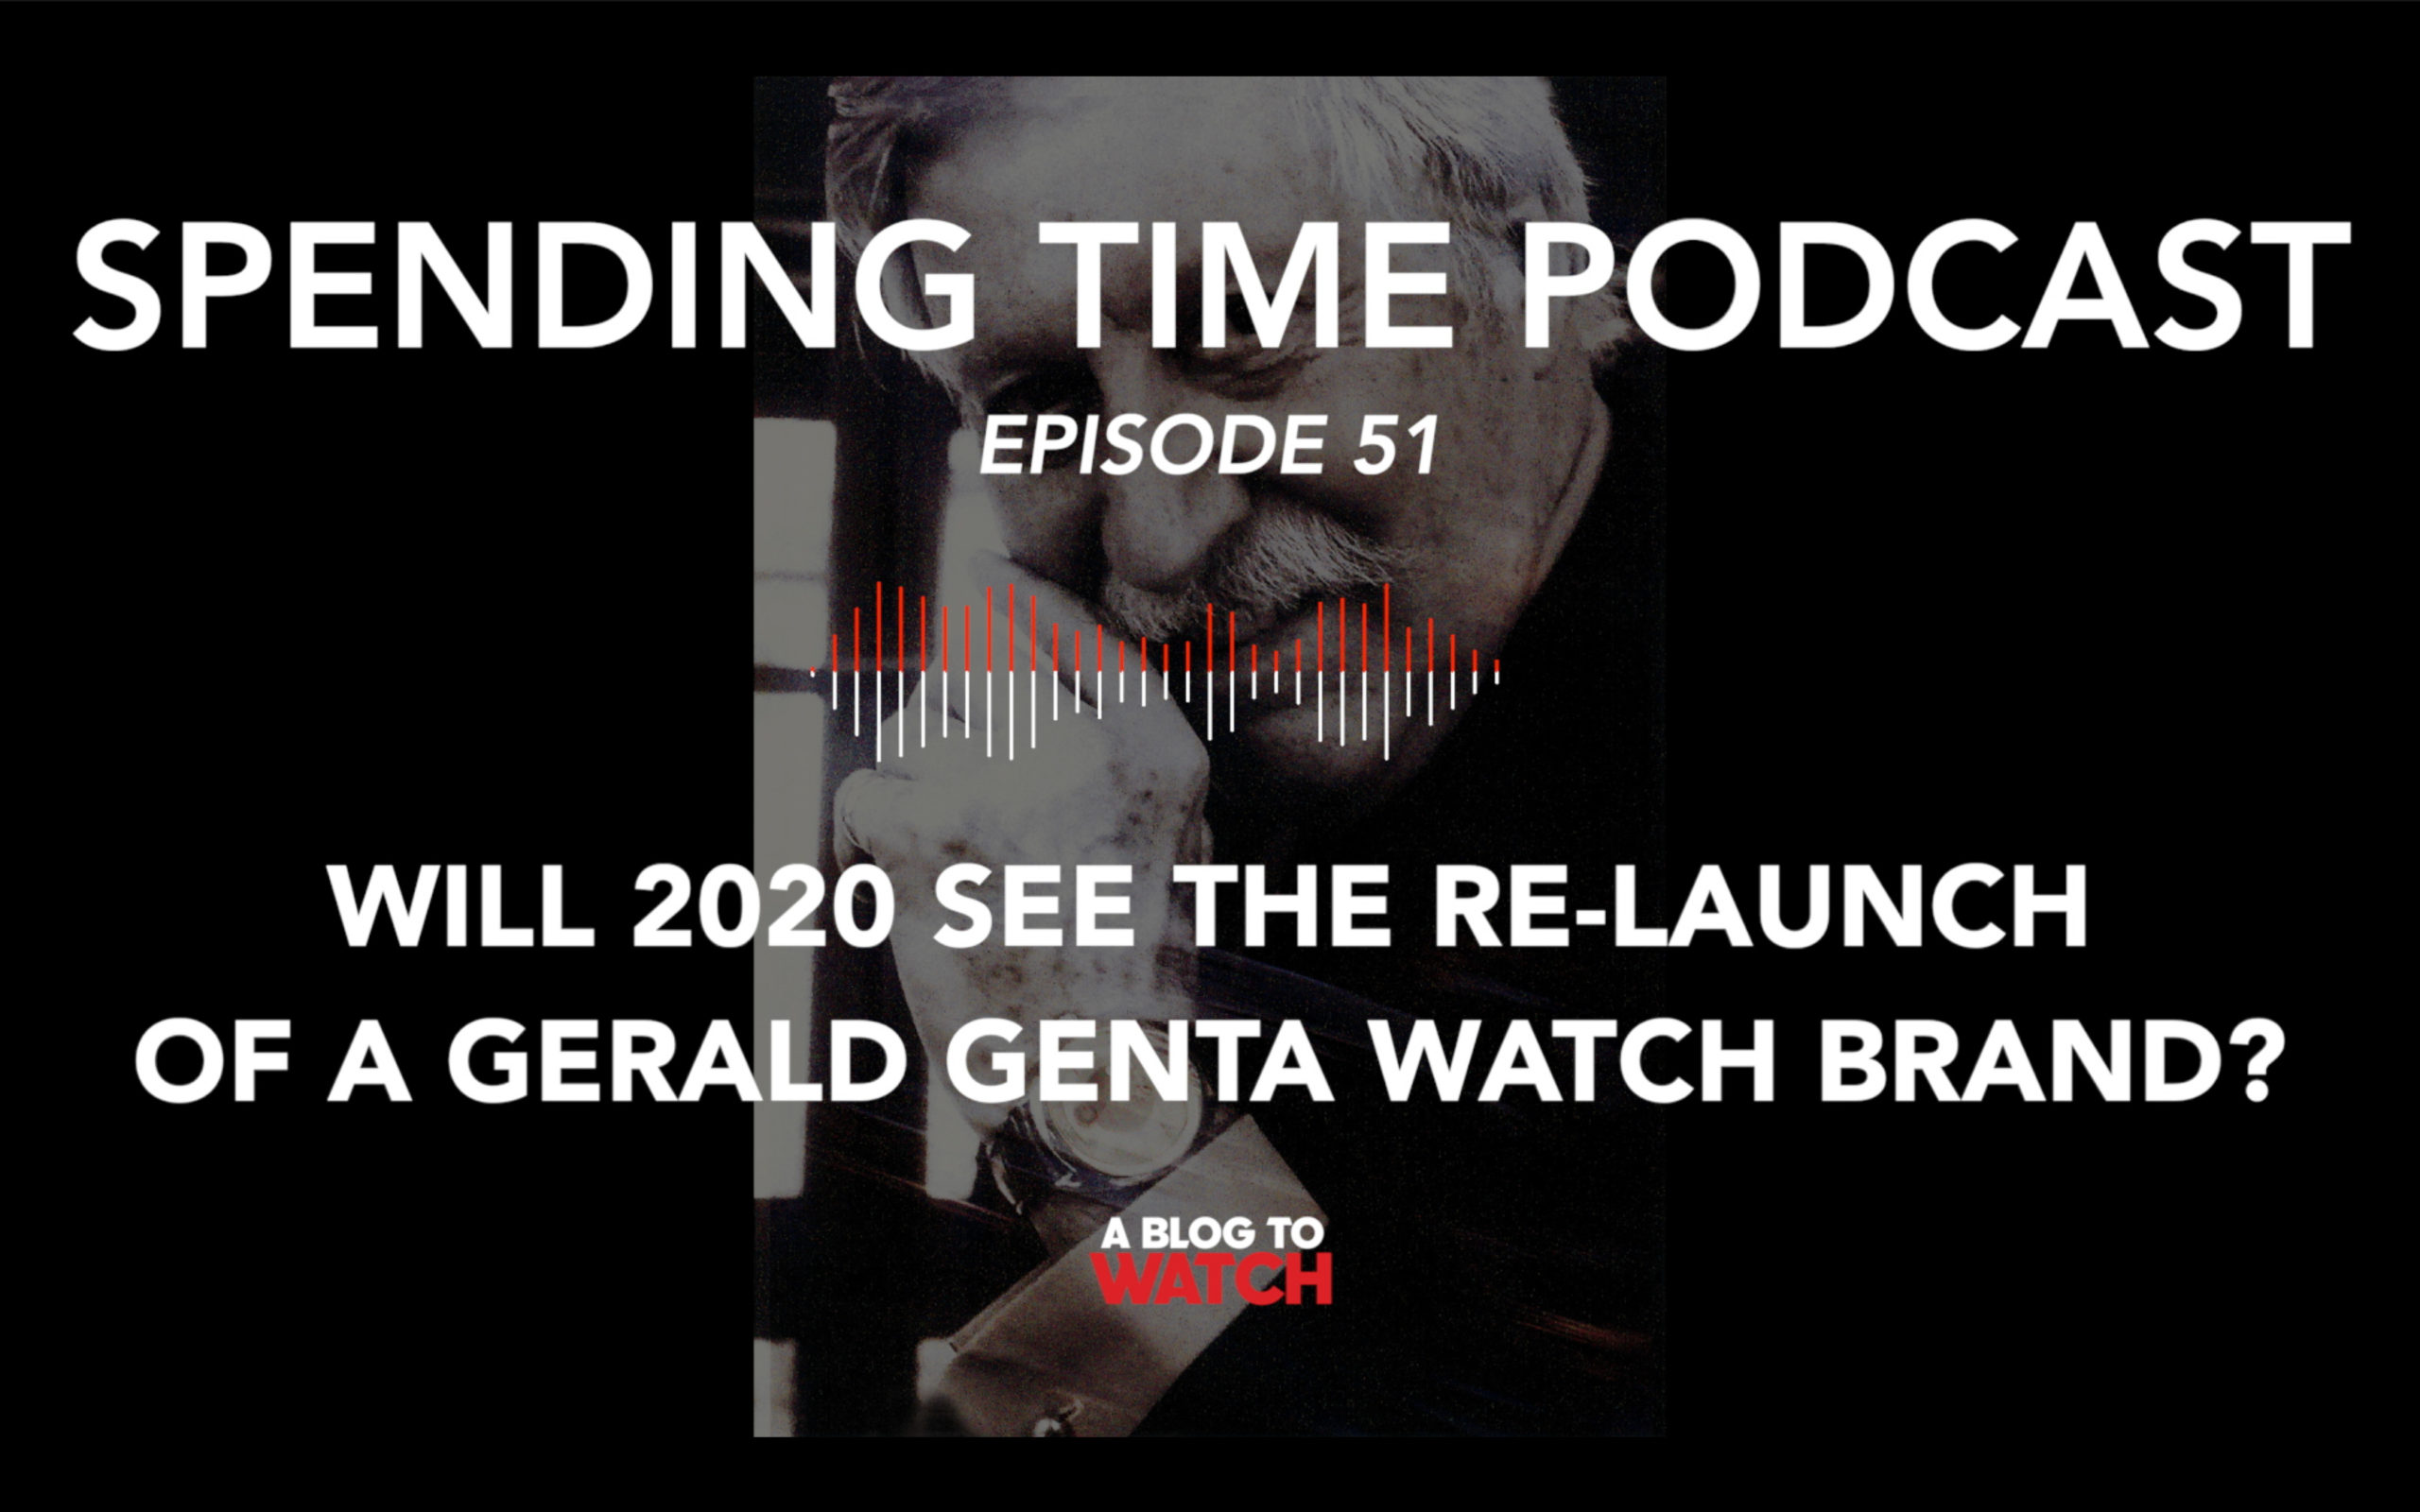 Spending Time Podcast Ep. 51 On The Potential Return Of The Gerald Genta Brand